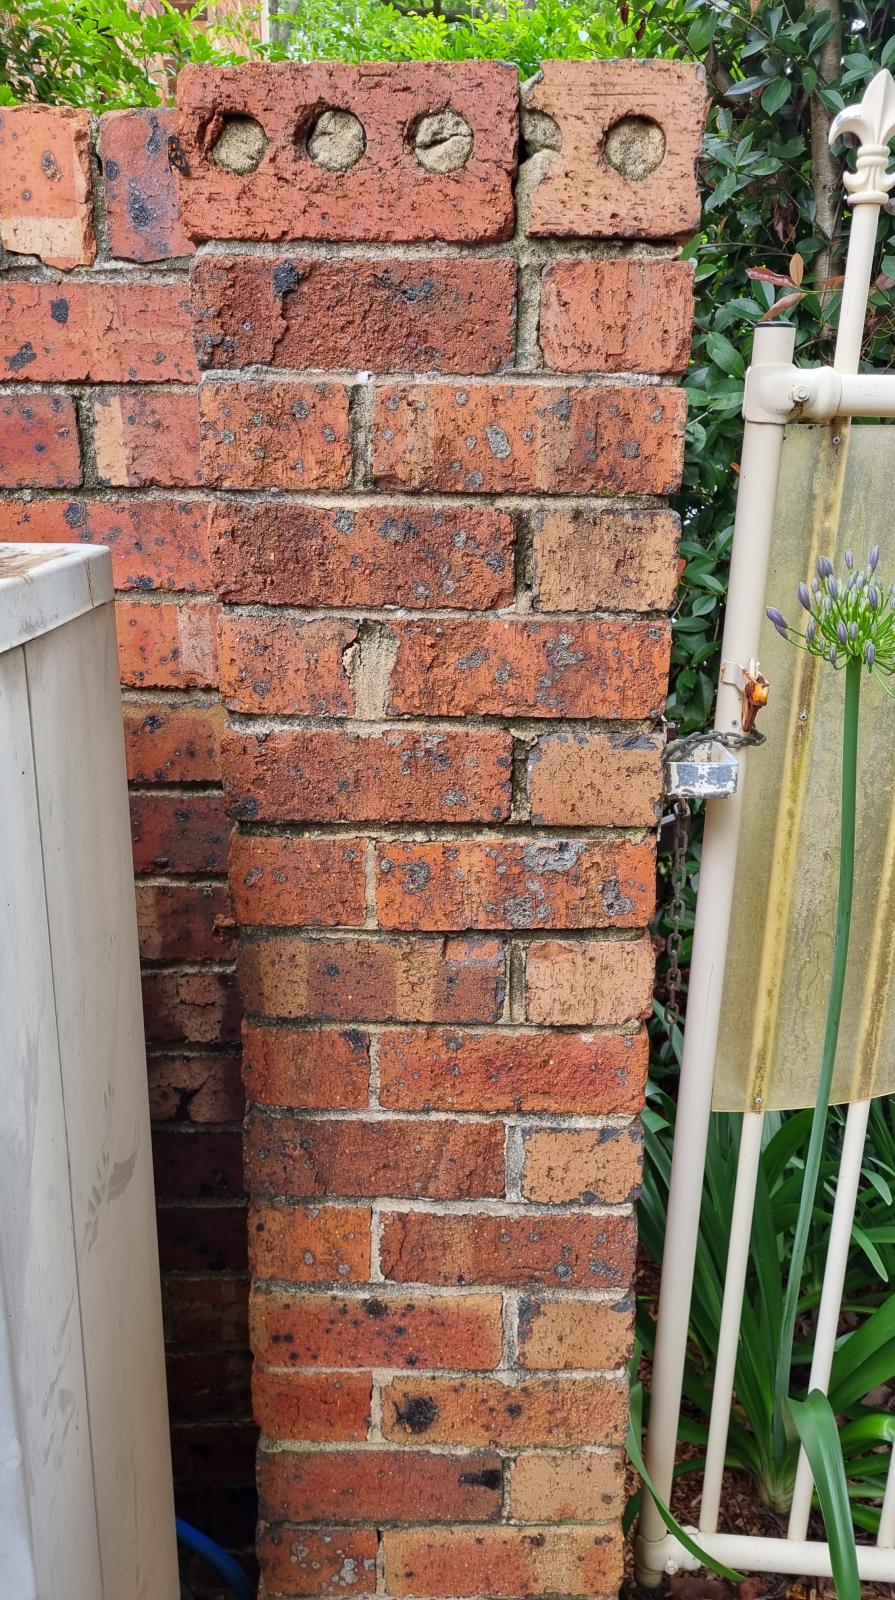 Laying brick on top of existing wall